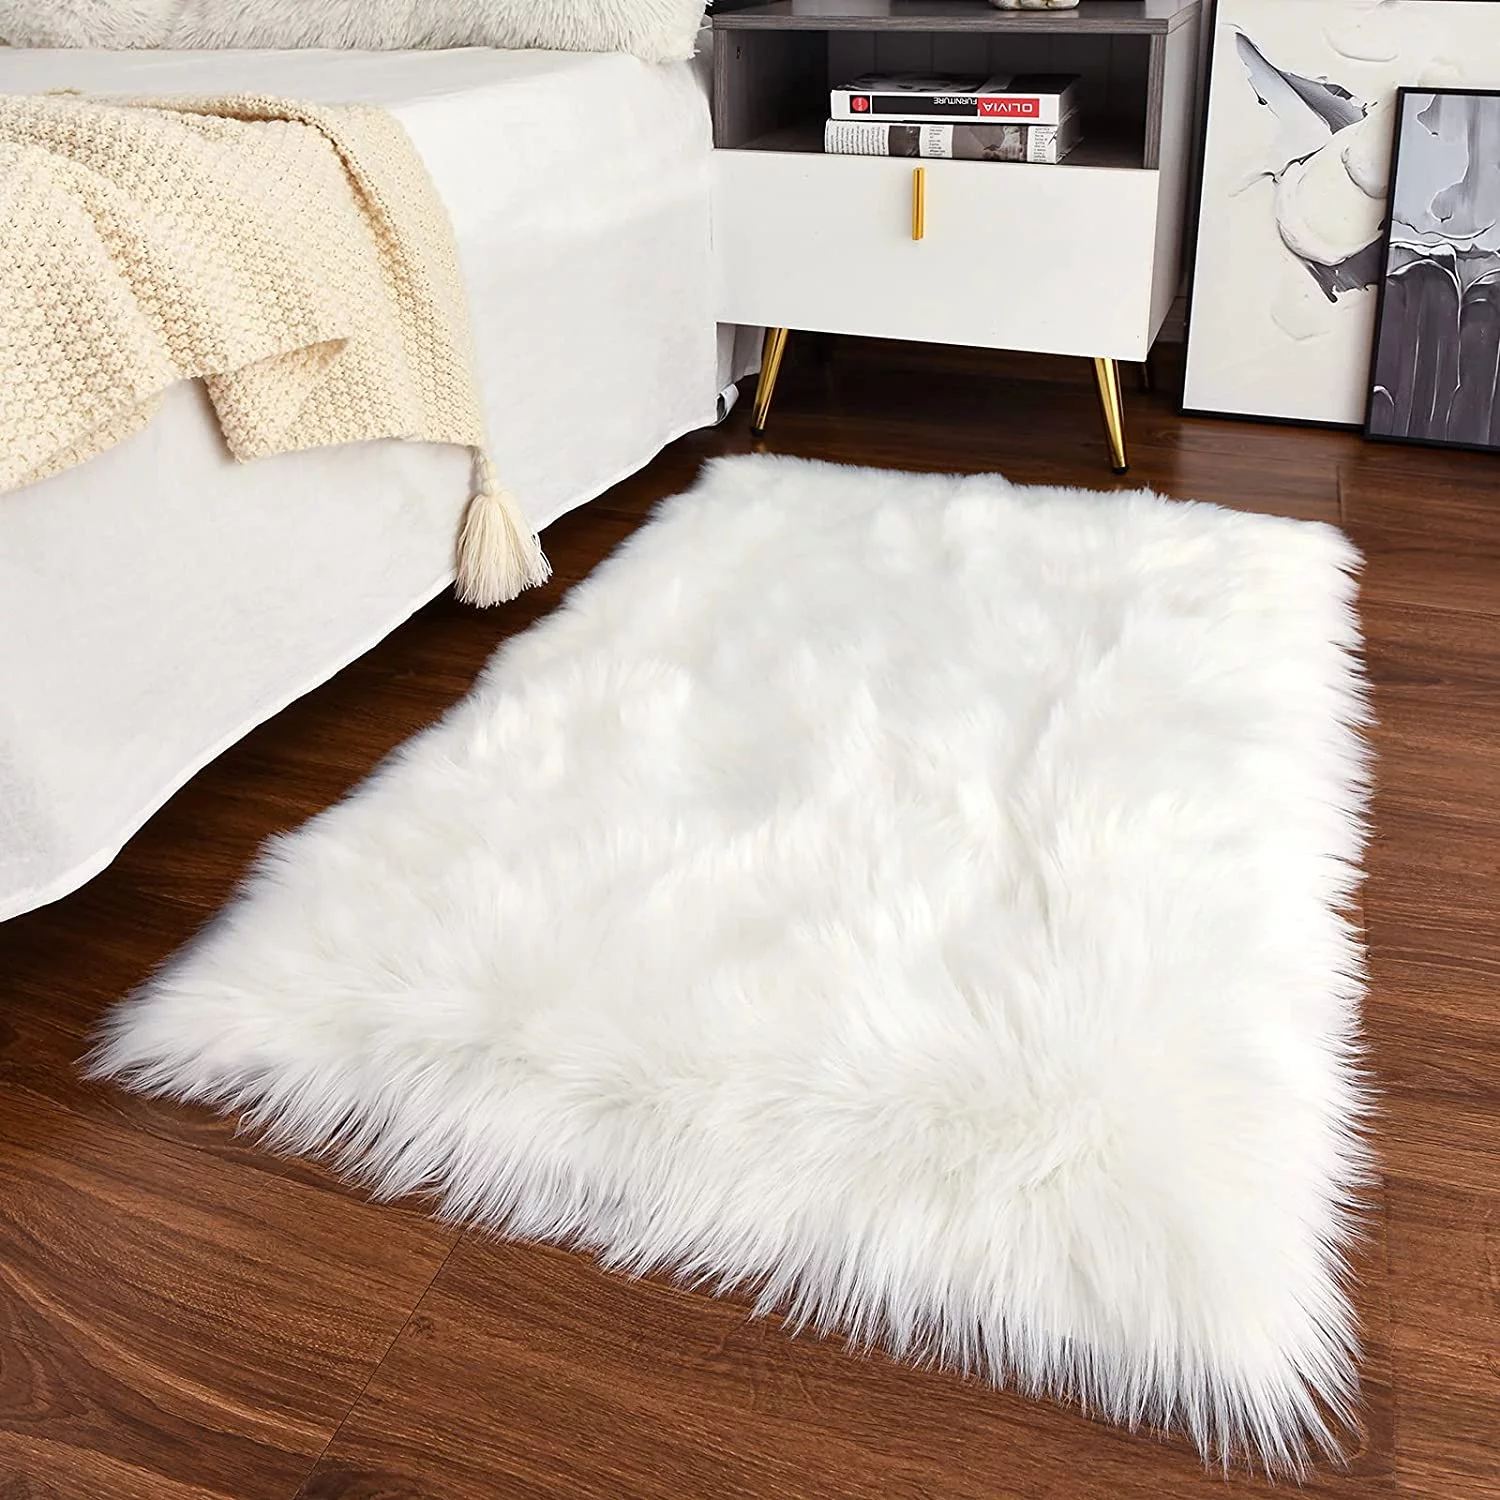 How To Wash White Fur Rug